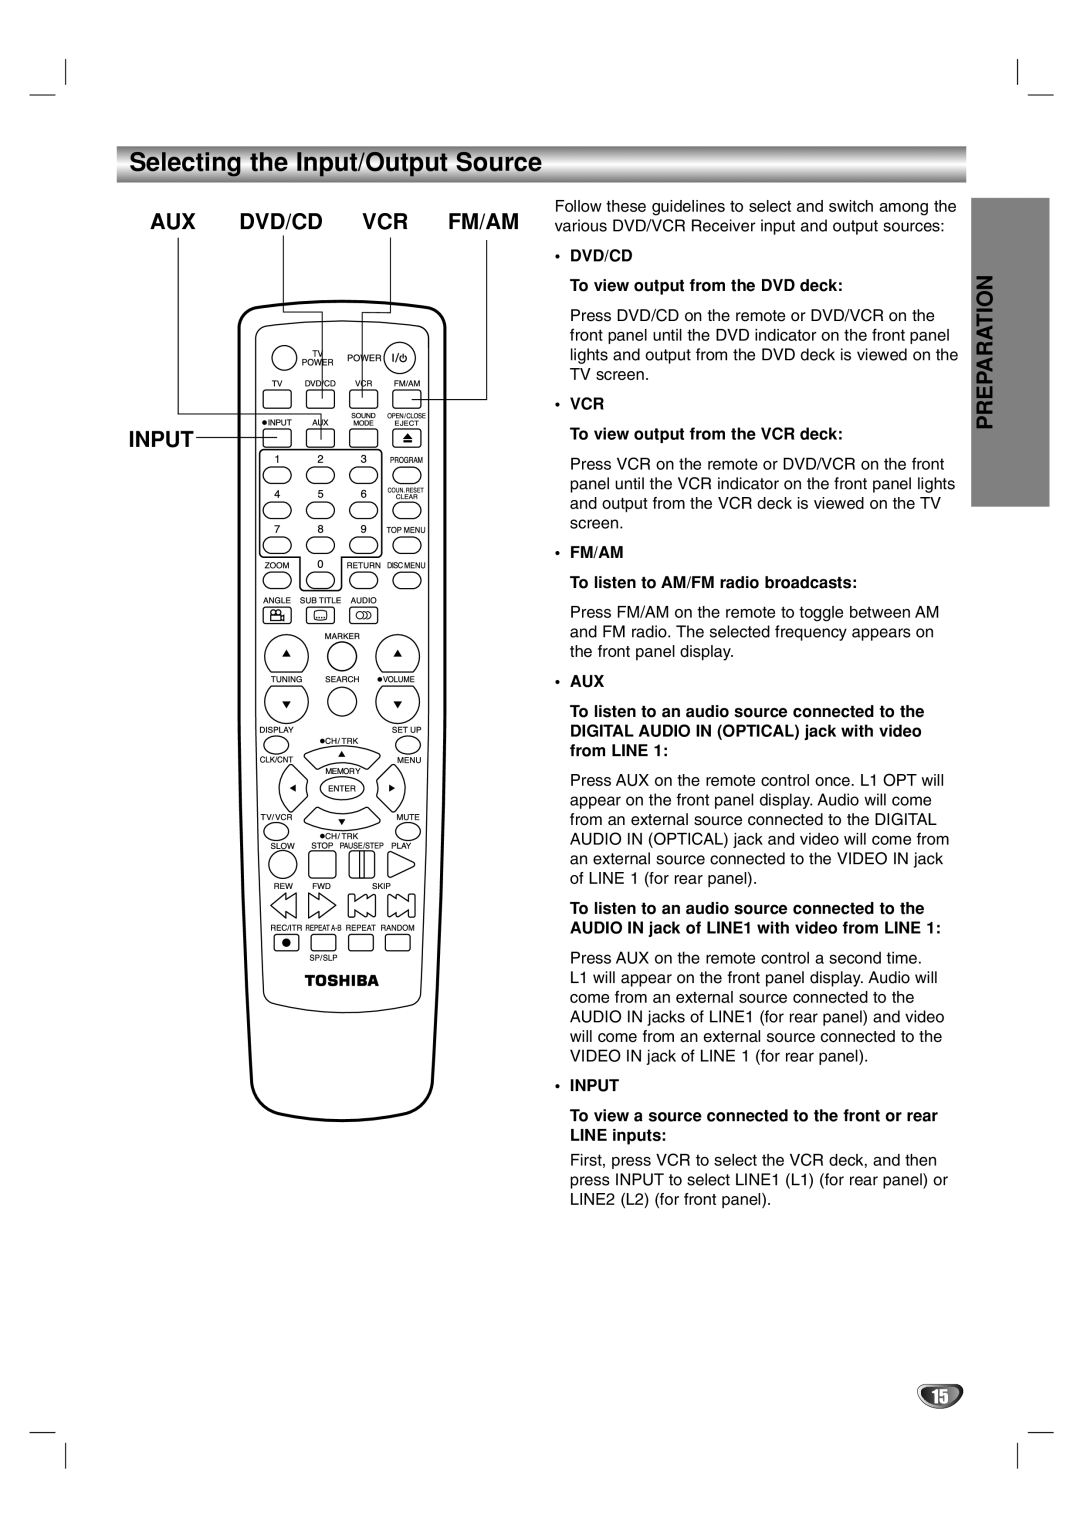 Toshiba SD-V57HTSU owner manual Selecting the Input/Output Source, Dvd/Cd, Fm/Am, Preparation 